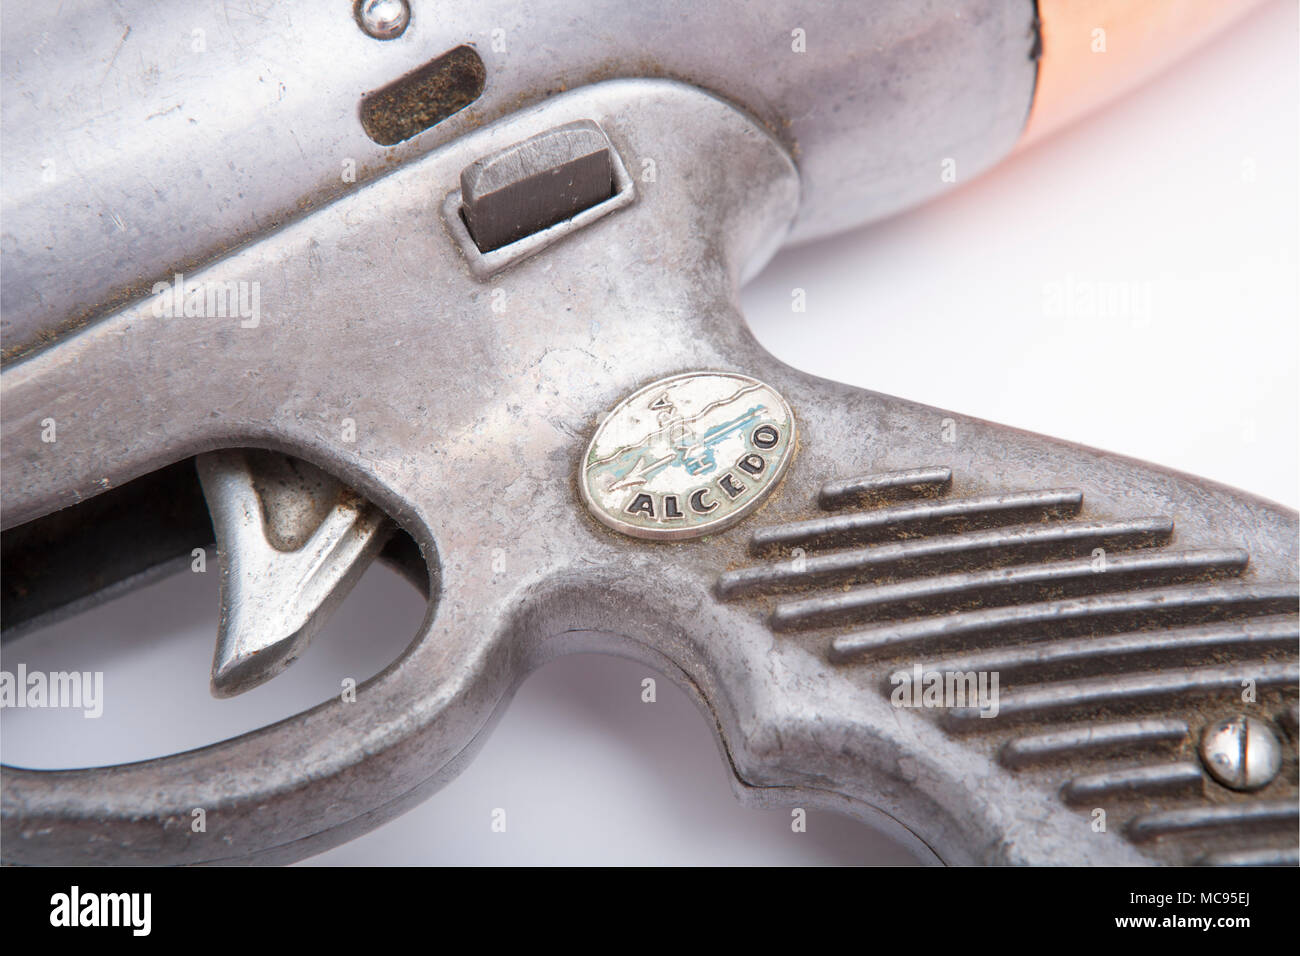 An Italian Alcedo Hydra pneumatic speargun probably made in the 1960s. The  spear tip is missing. Dorset England UK GB Stock Photo - Alamy